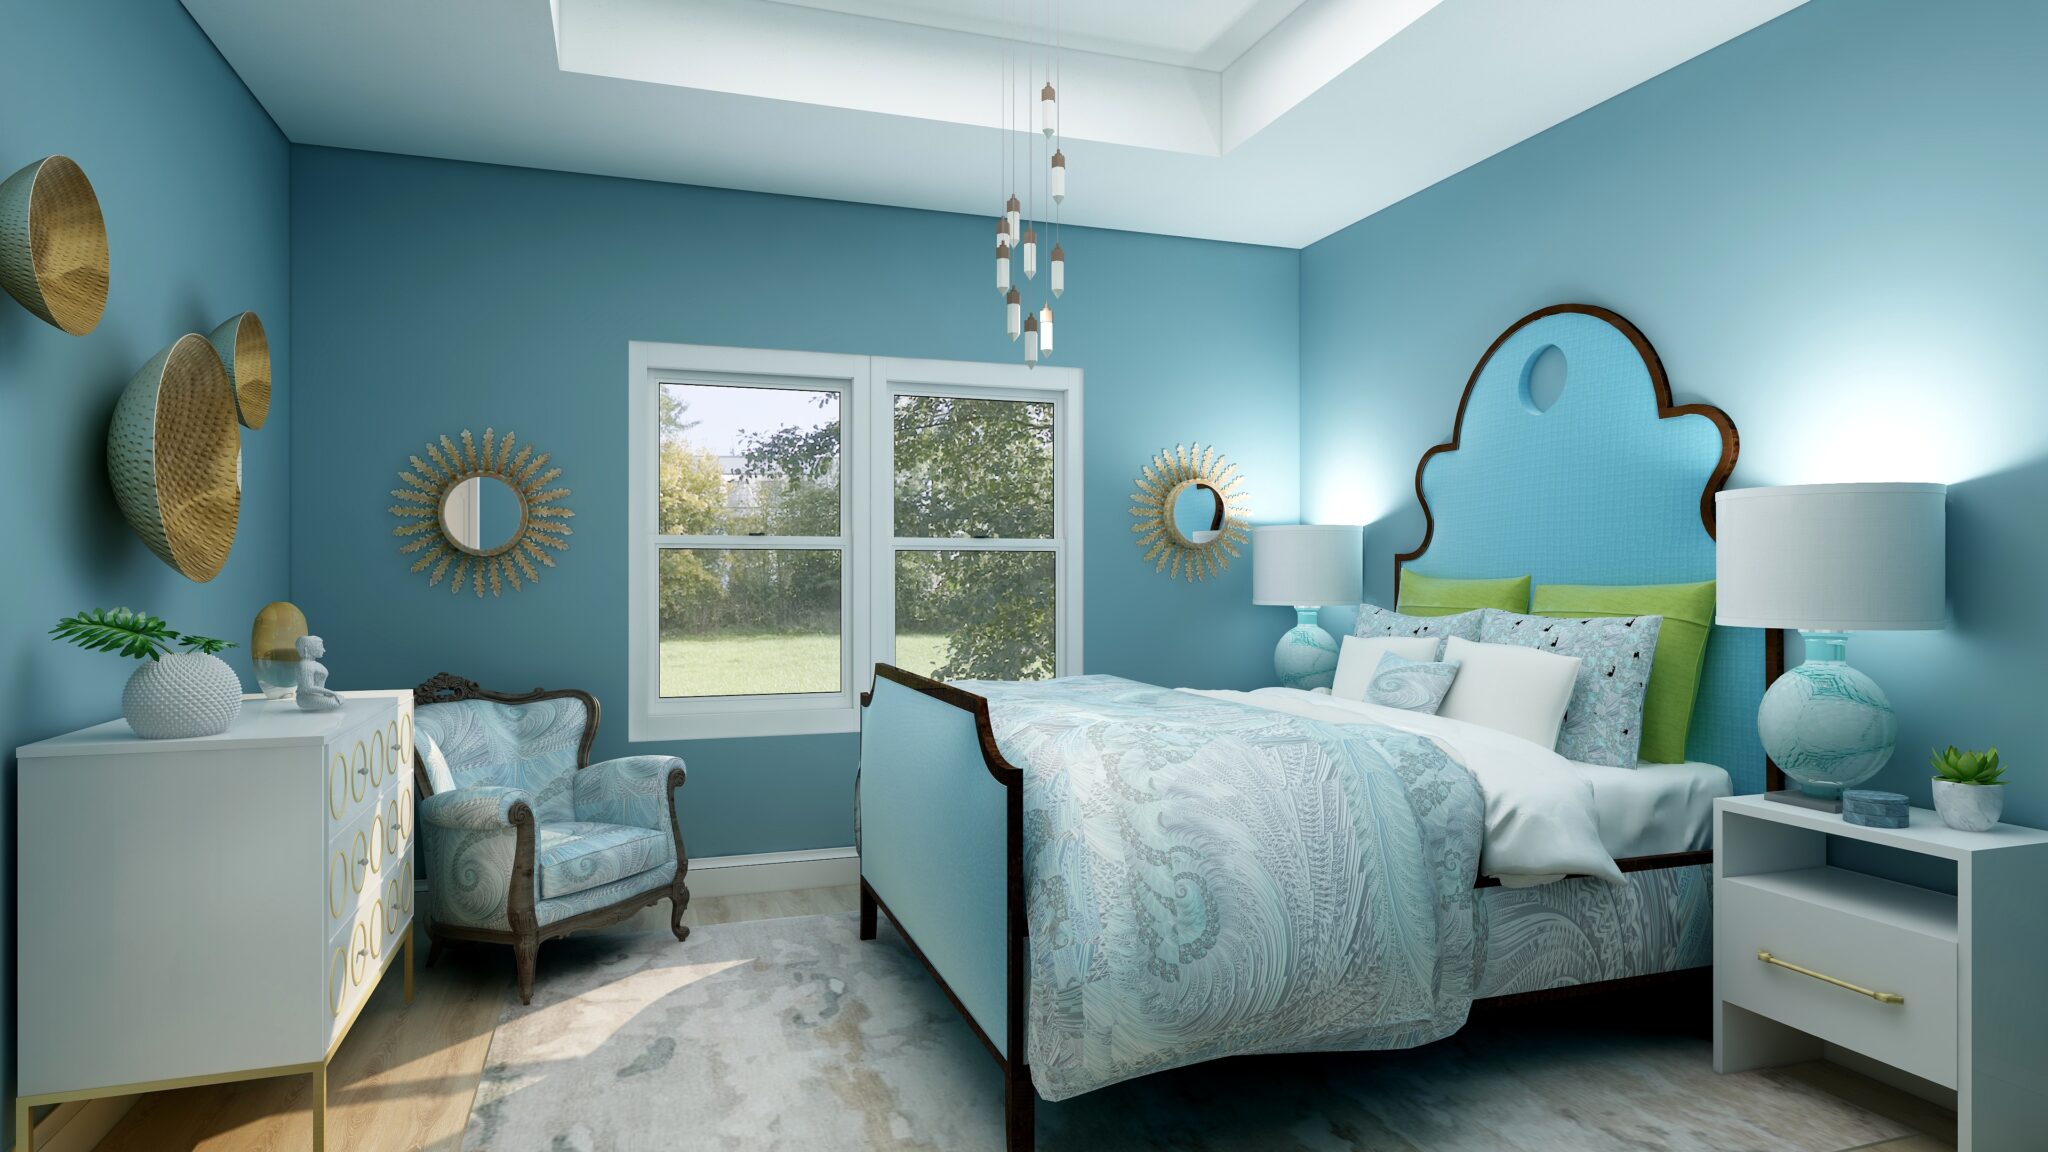 Using Benjamin Moore's 2021 Color of the Year Aegean Teal by NOrthern Lights Home Staging and Design